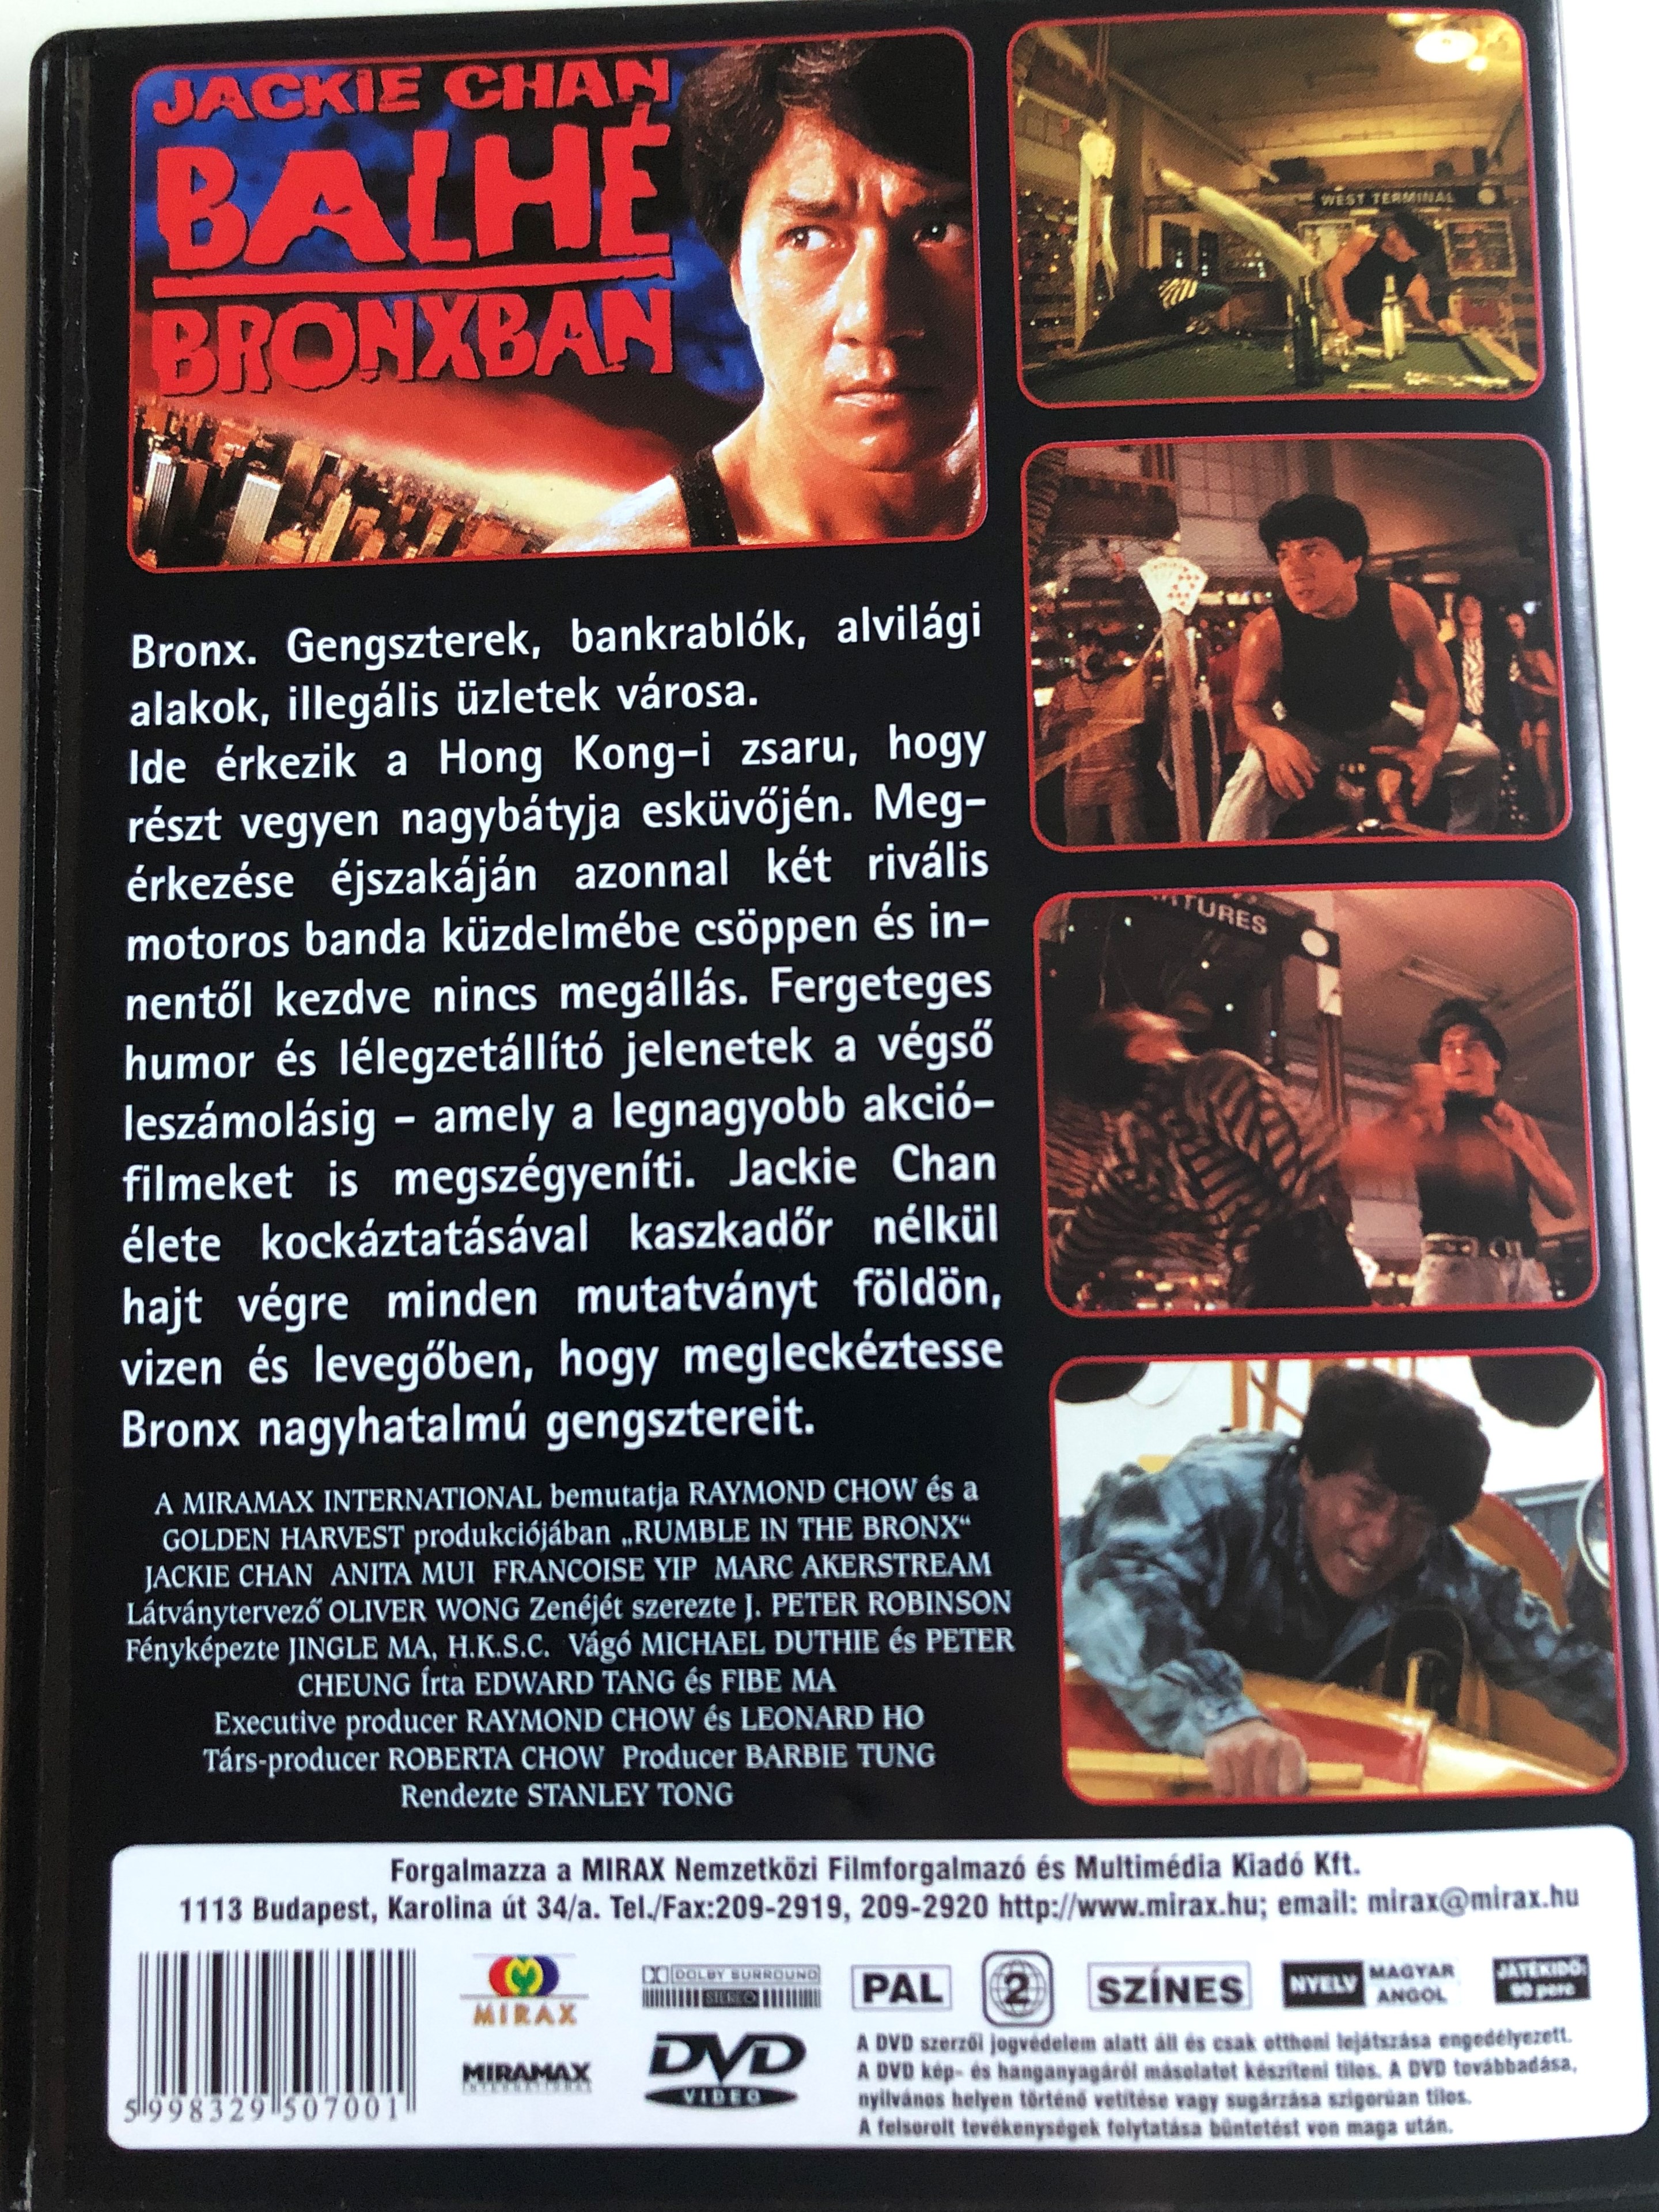 rumble-in-the-bronx-dvd-1995-balh-bronxban-directed-by-stanley-tong-2.jpg